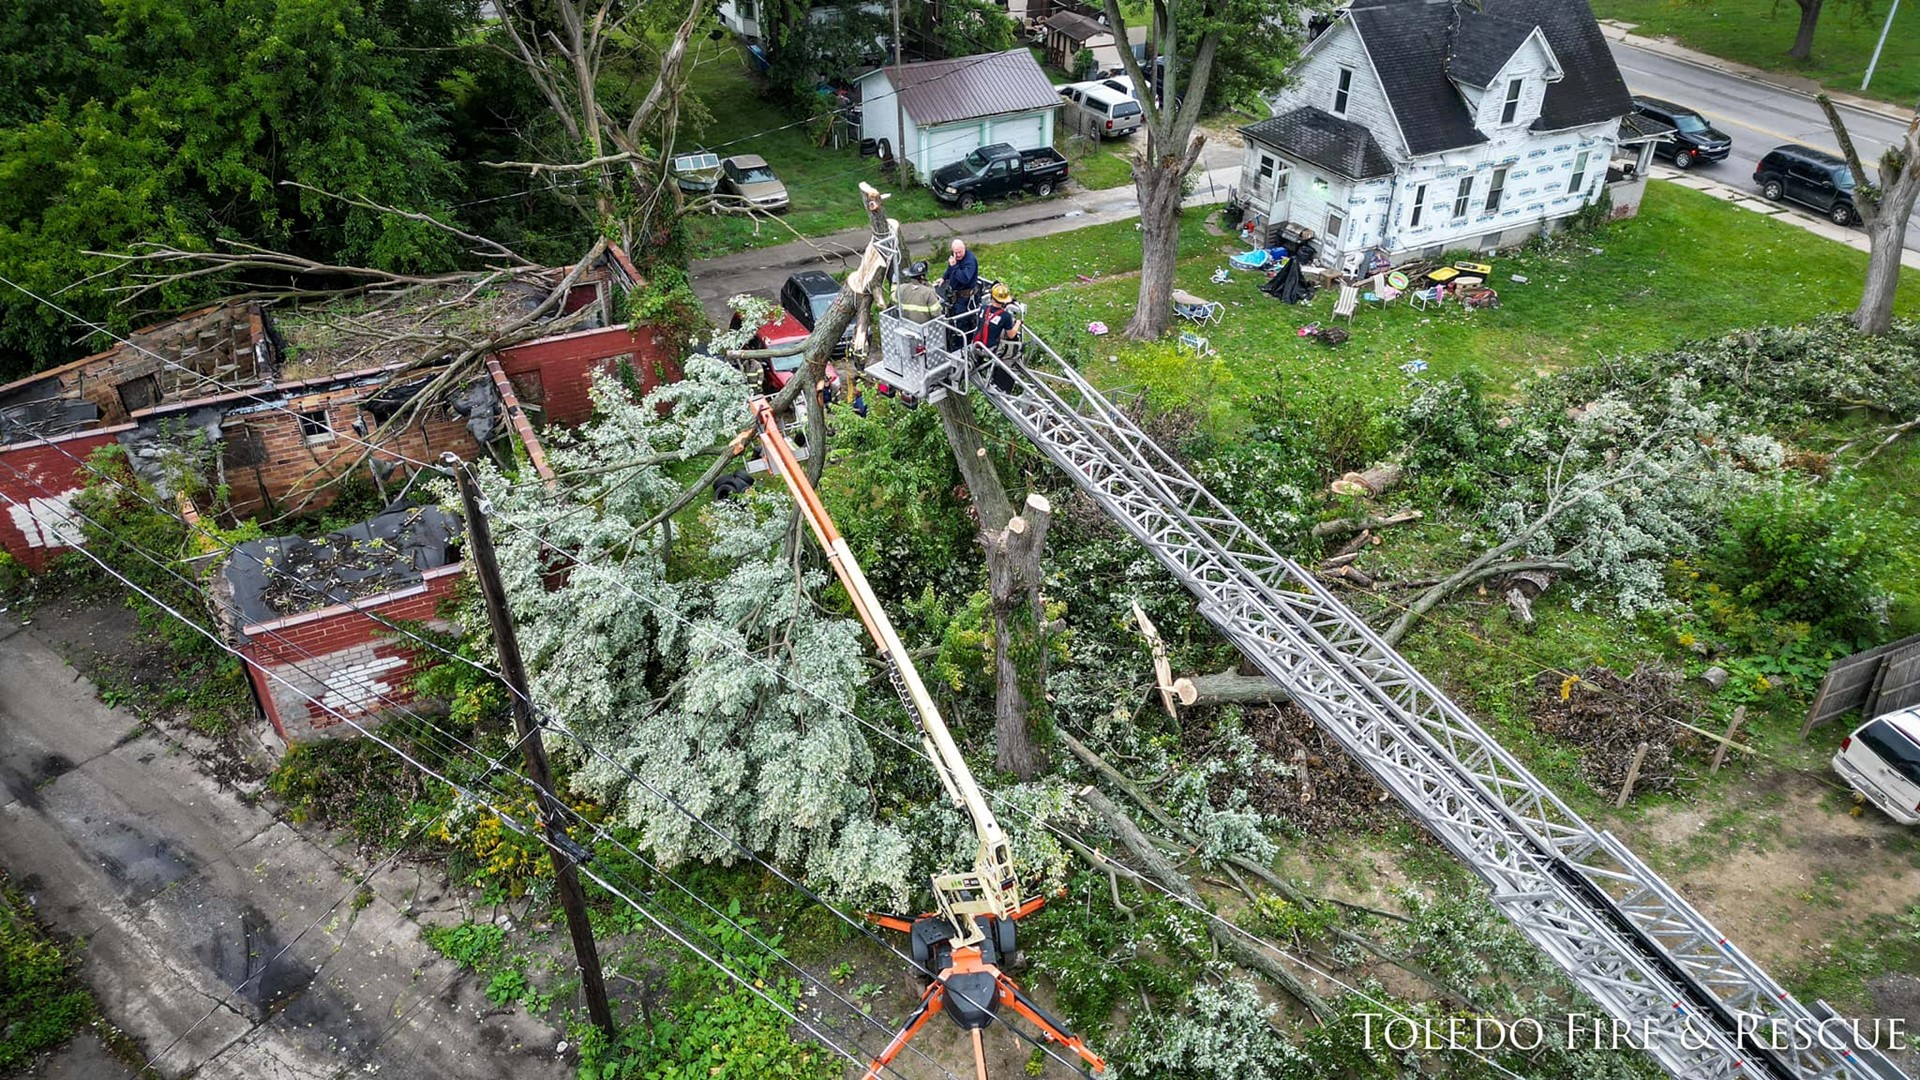 Drone video from the Toledo Fire & Rescue Department shows crews rescuing a tree trimming worker who was trapped in a boom lift Monday.